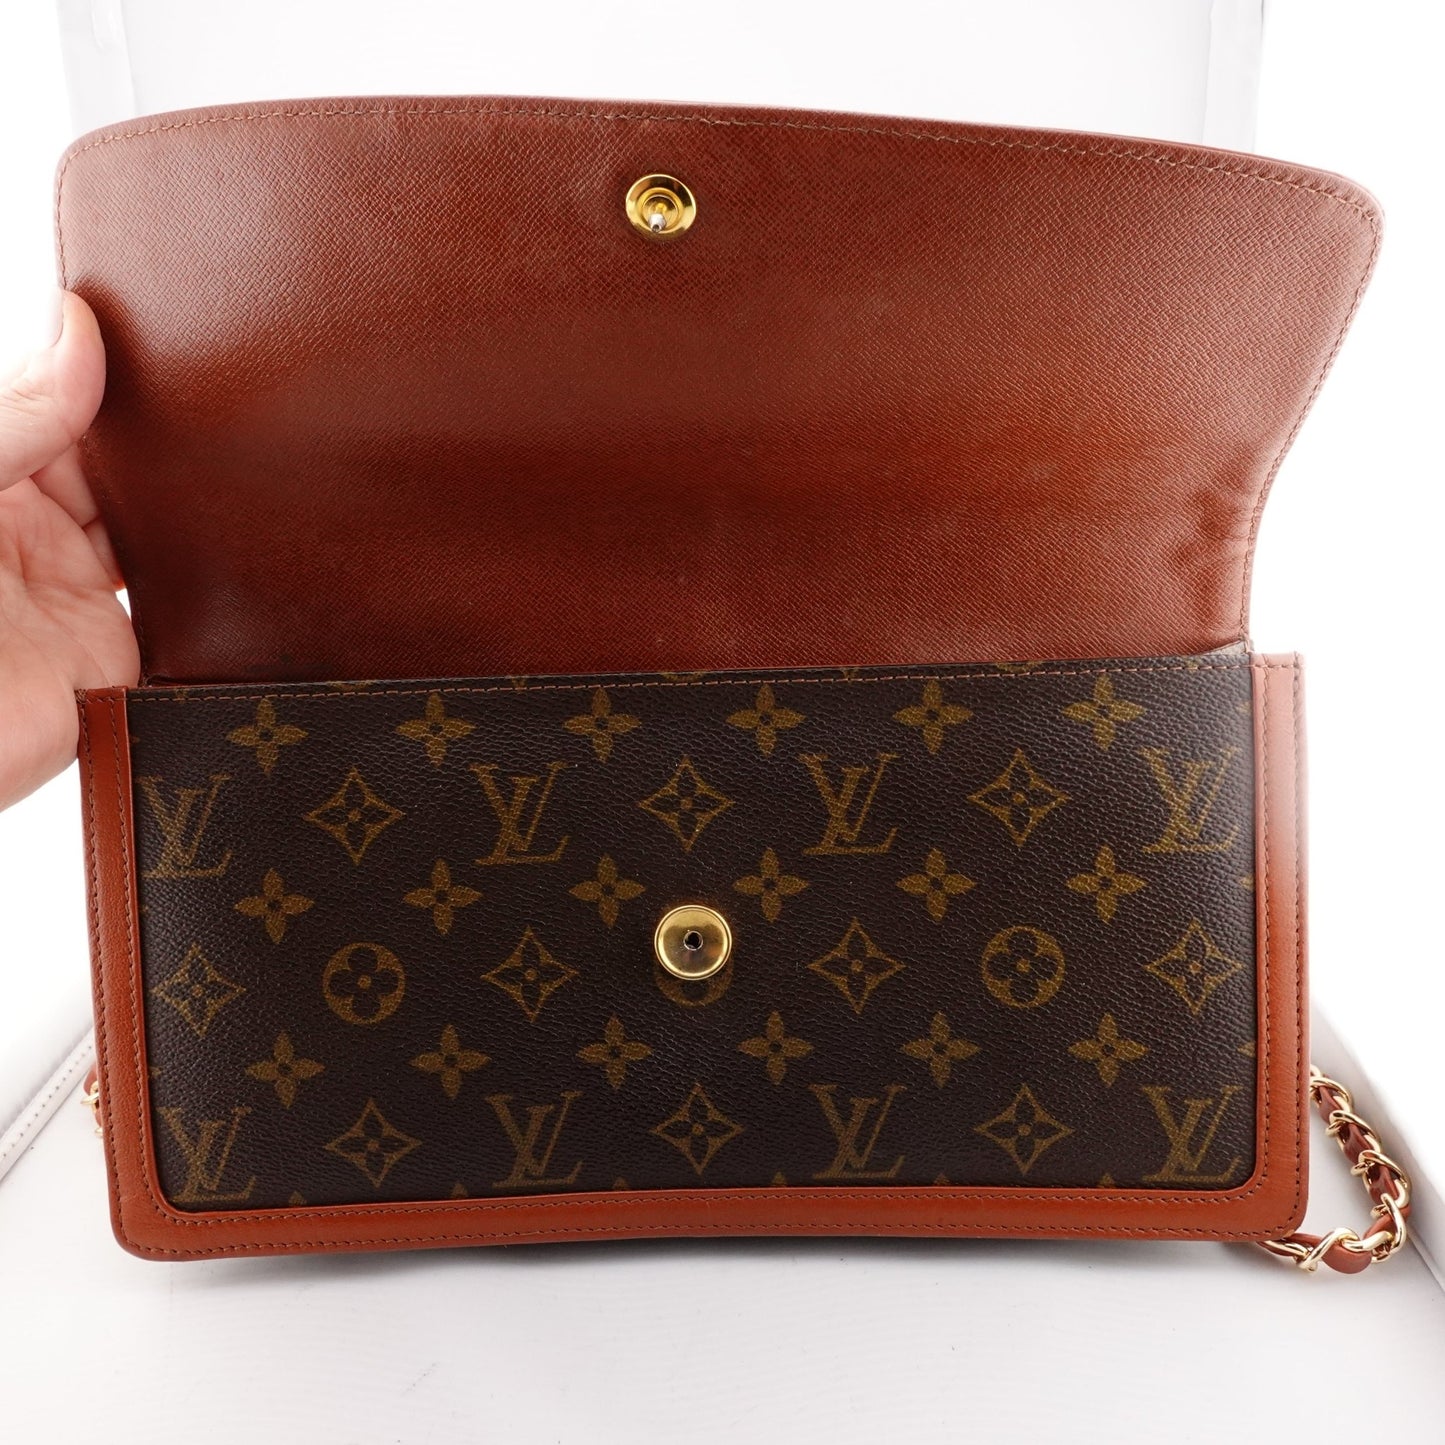 LOUIS VUITTON Monogram Dame GM with Leather Chain - Bag Envy